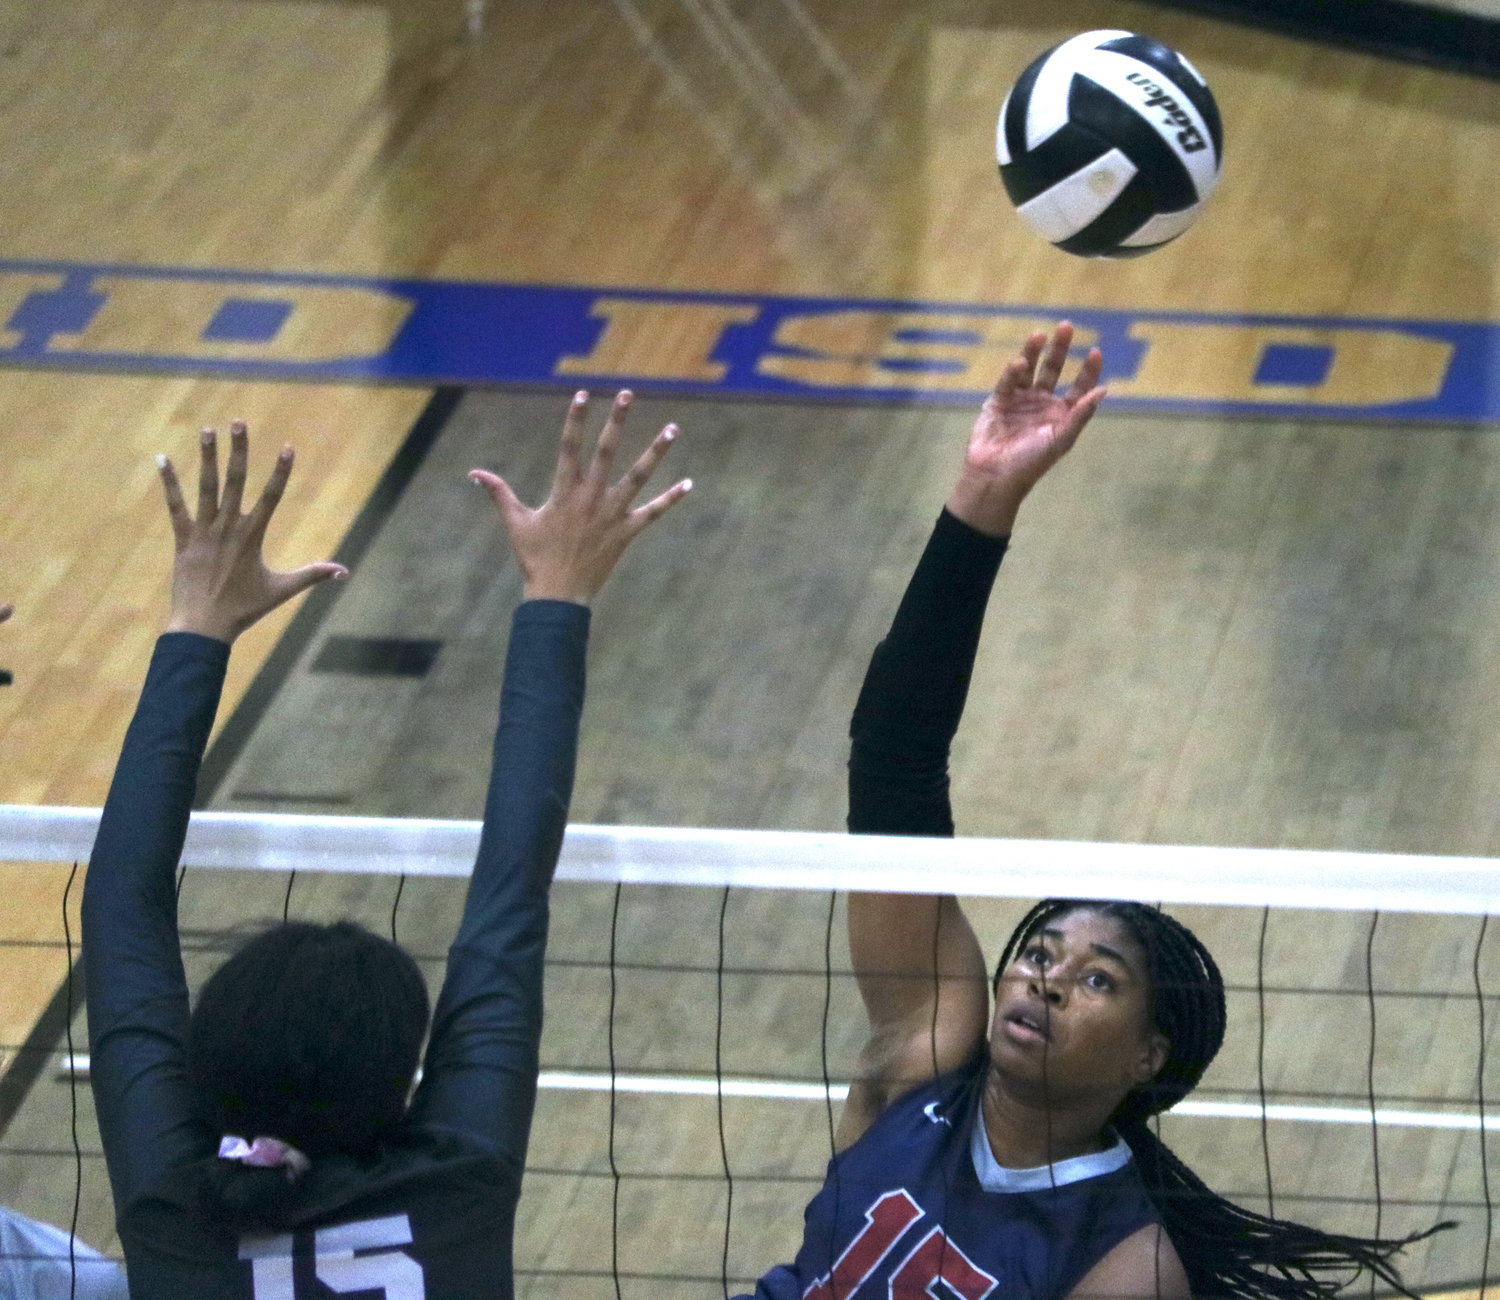 Tendai Titley makes a kill attempt during Tuesday's match between Tompkins and Ridge Point at Wheeler Field House.